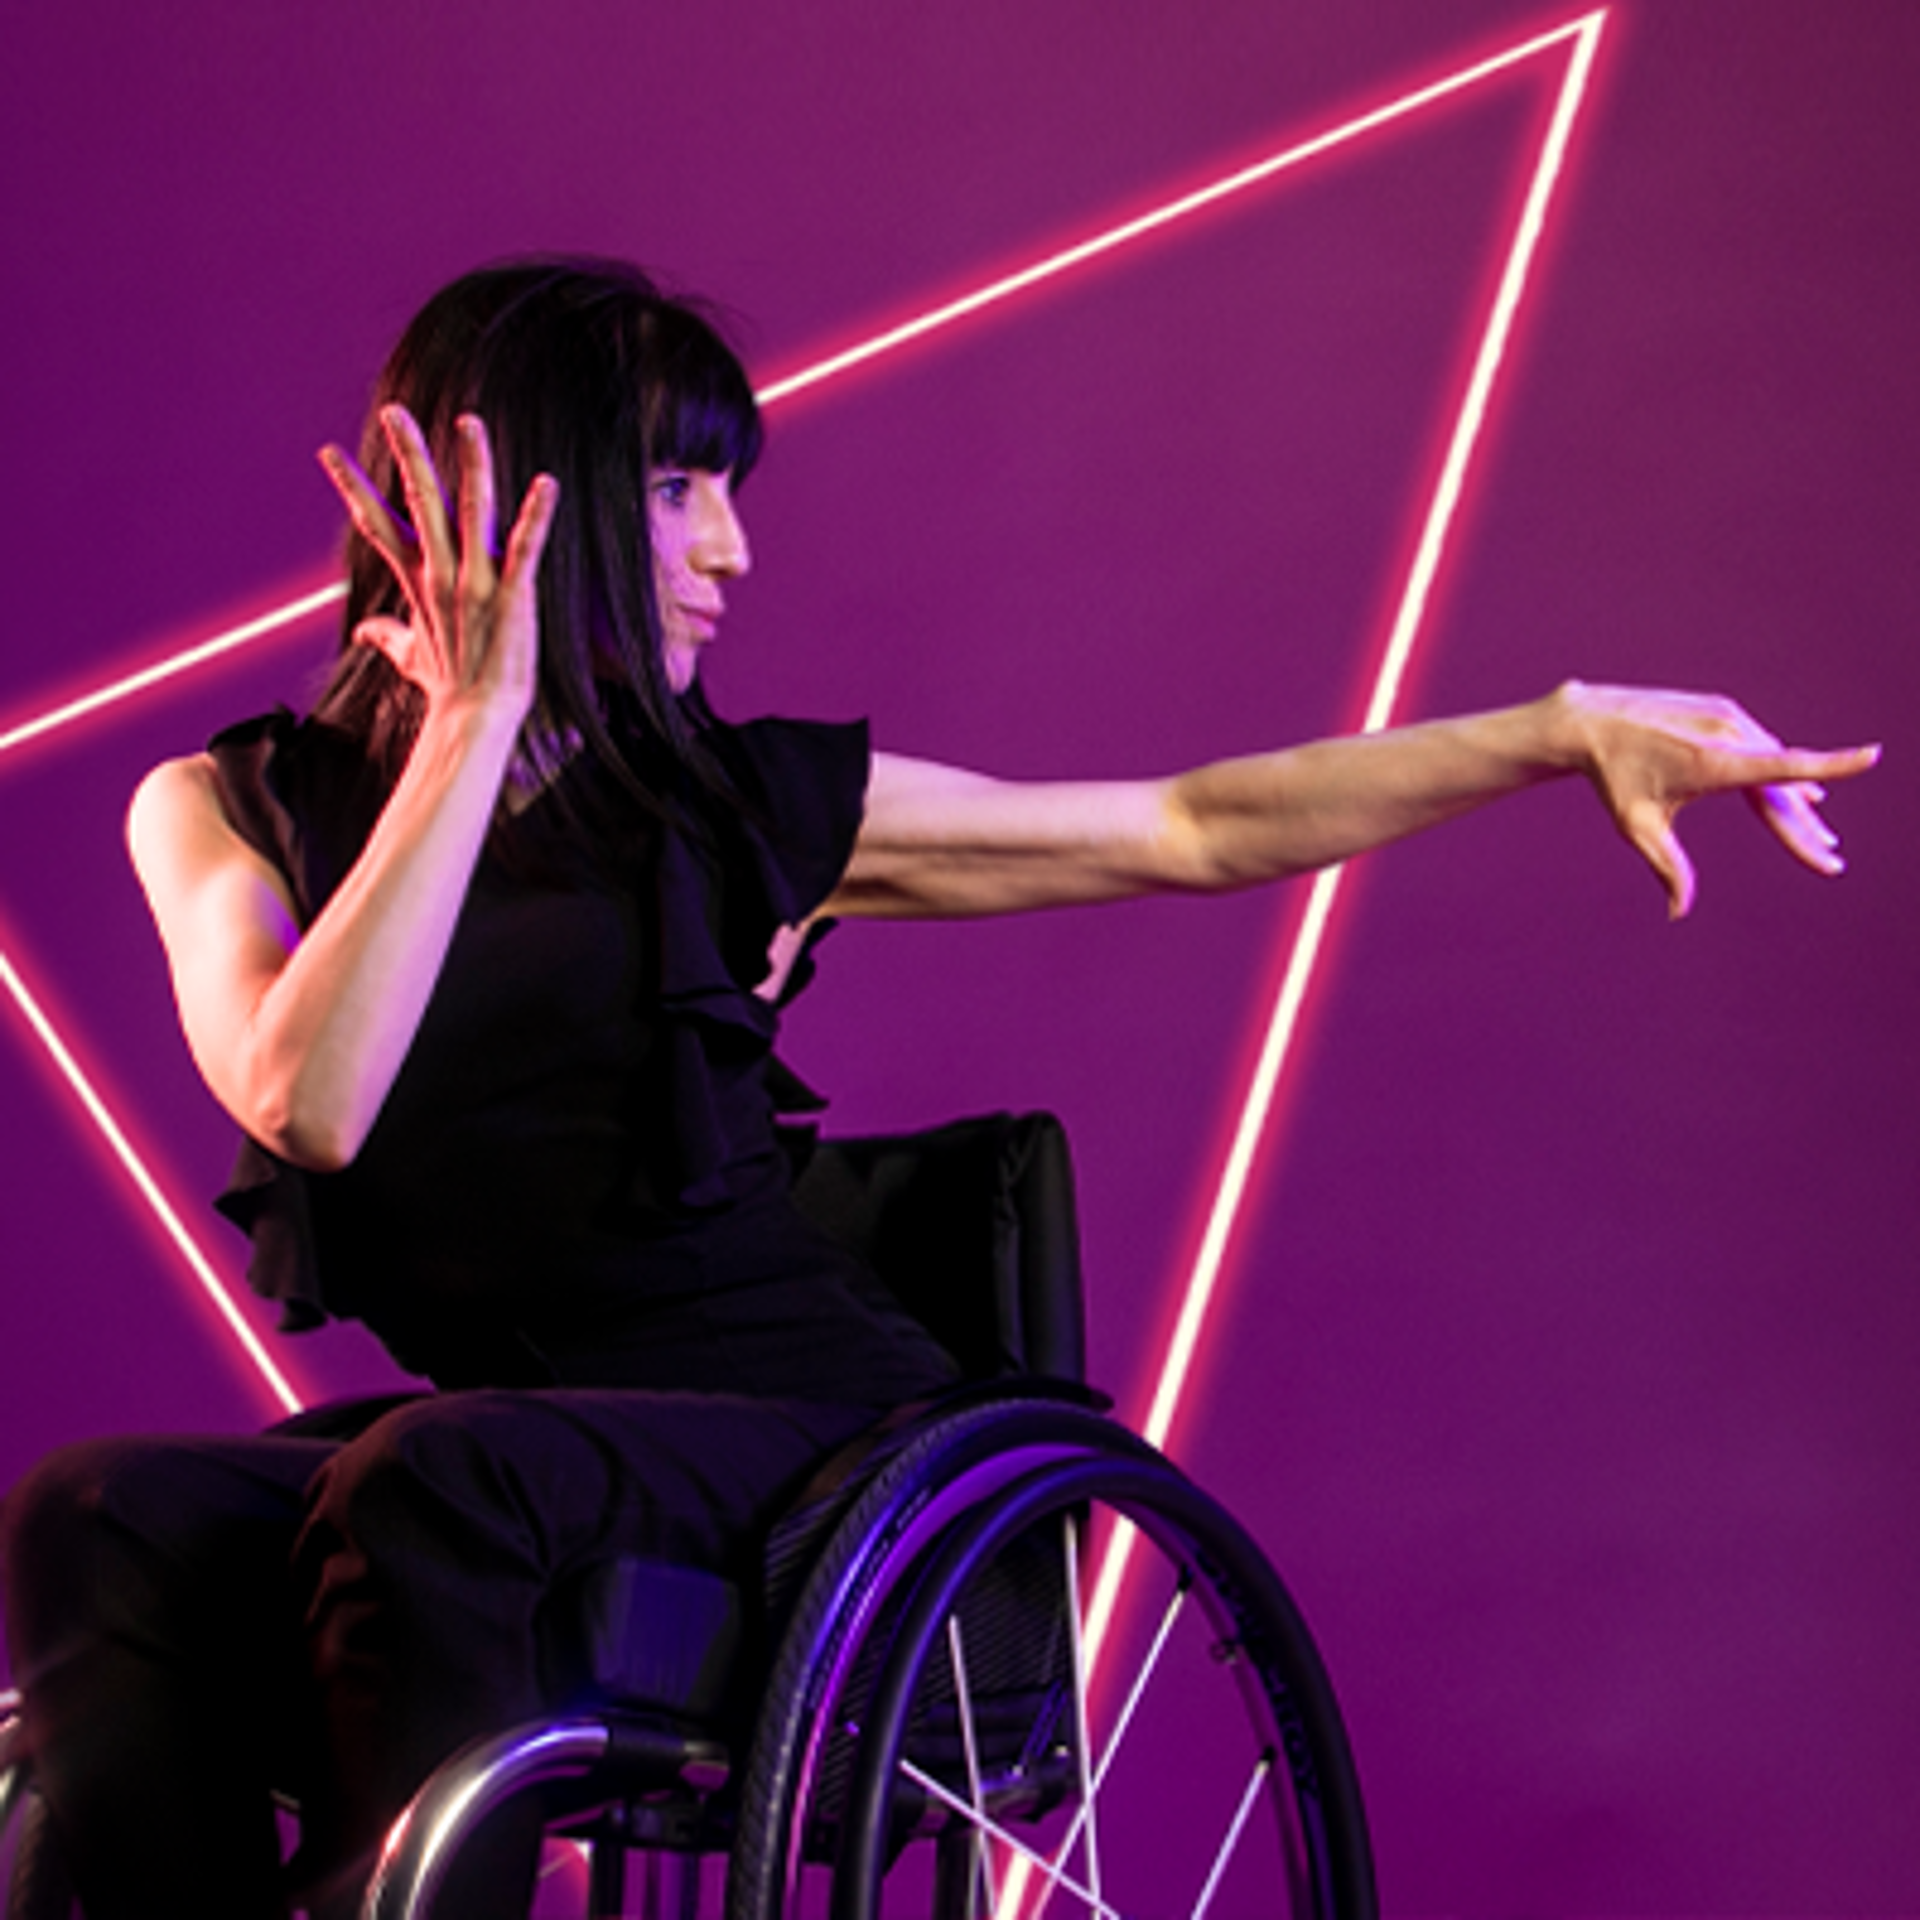 White female wheelchair dancer with black hair. With one hand holding her ear and the other arm pointed to the right hand side of the image, her head and wheel chair side on. Wearing black top and trousers in front of hot pink studio background.